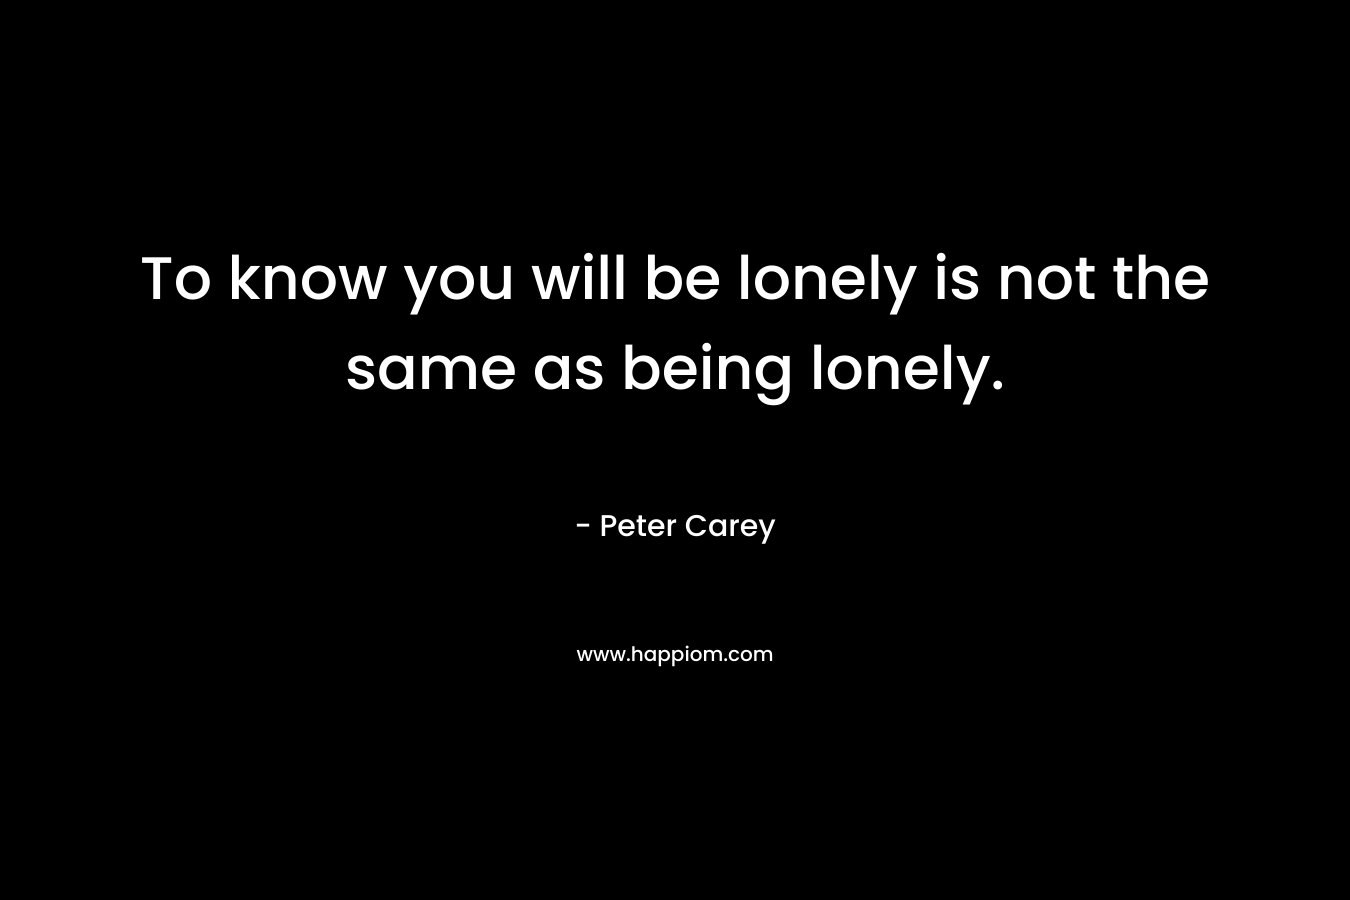 To know you will be lonely is not the same as being lonely.